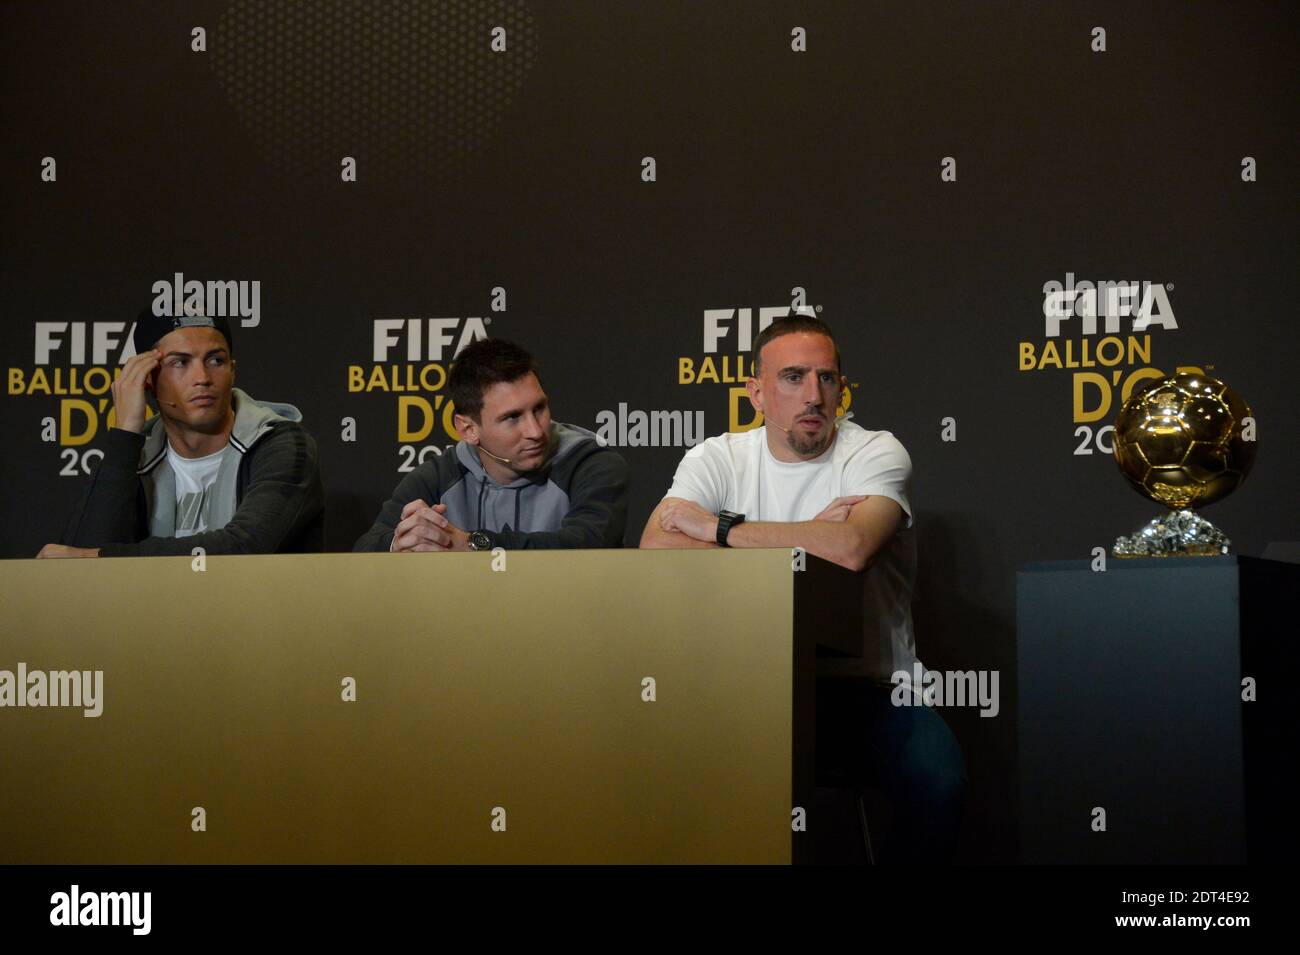 FIFA Golden Ball 2013's Press Conference of Cristiano Ronaldo, Messi and Franck Ribery in Congress House, Zurich, Switzerland on January 13th, 2014. Photo by Henri Szwarc/ABACAPRESS.COM Stock Photo